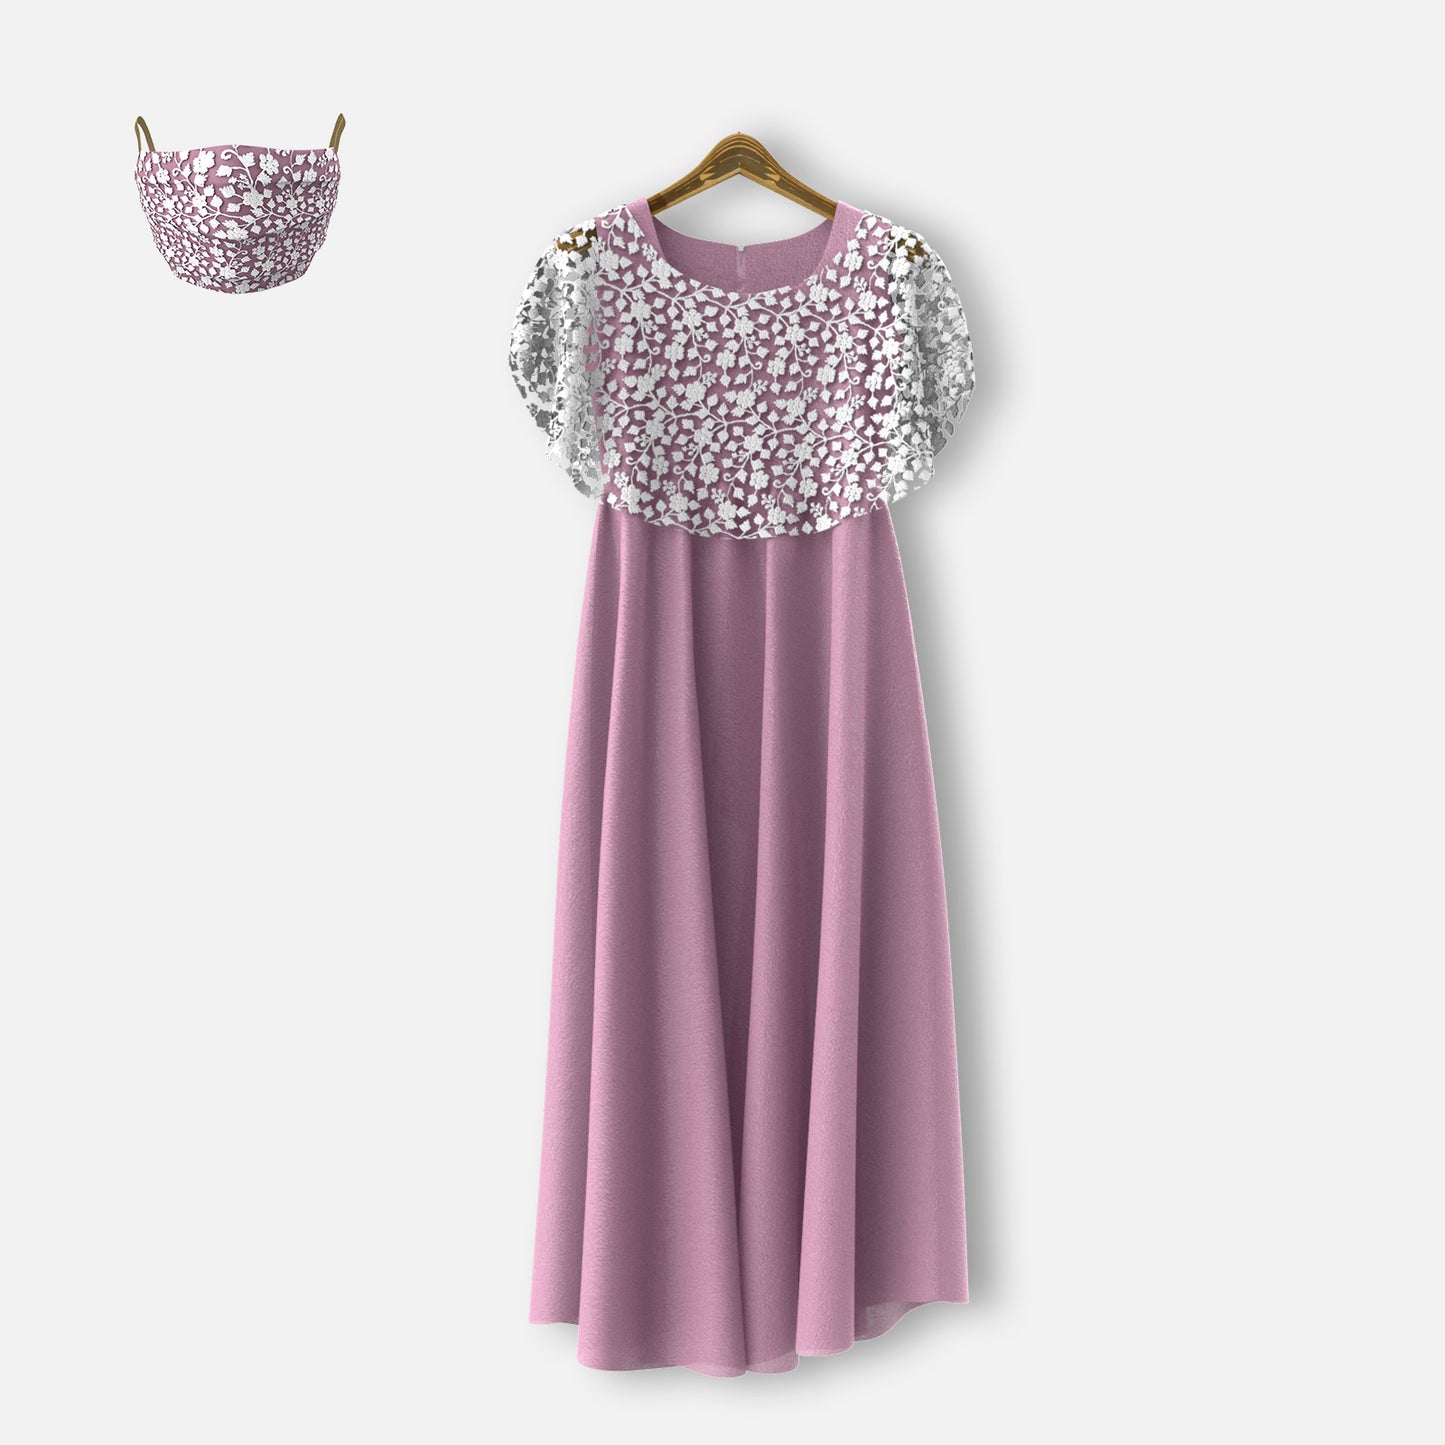 beautiful casual designer frocks floral embroidered maxi unique stylish comfortable clothing for girl child exclusive kidswear at heykidoo